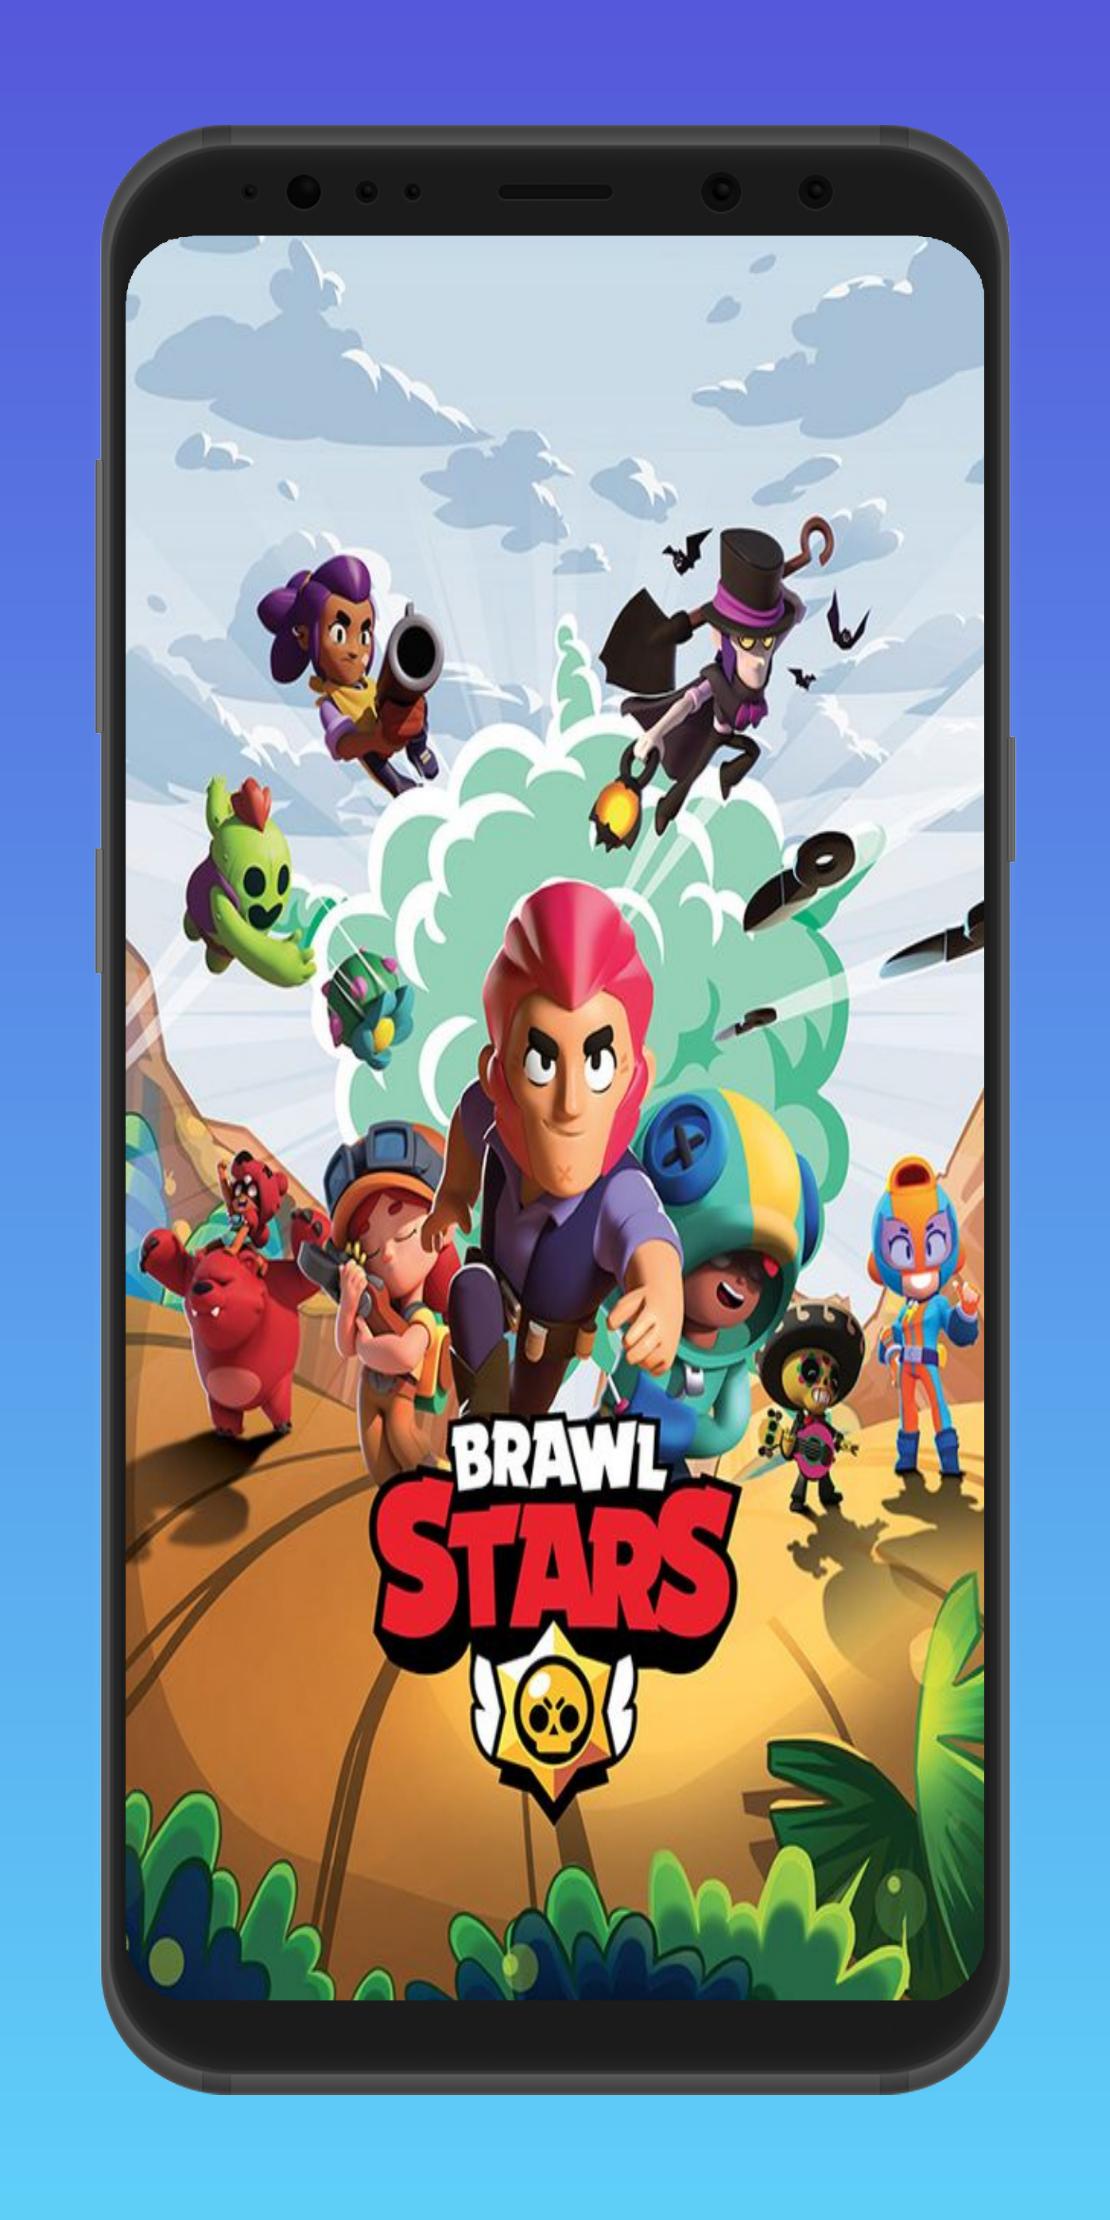 4k Brawl Stars Wallpapers 2021 Hd Bs Wallpaper For Android Apk Download - cool background screen brawl stars